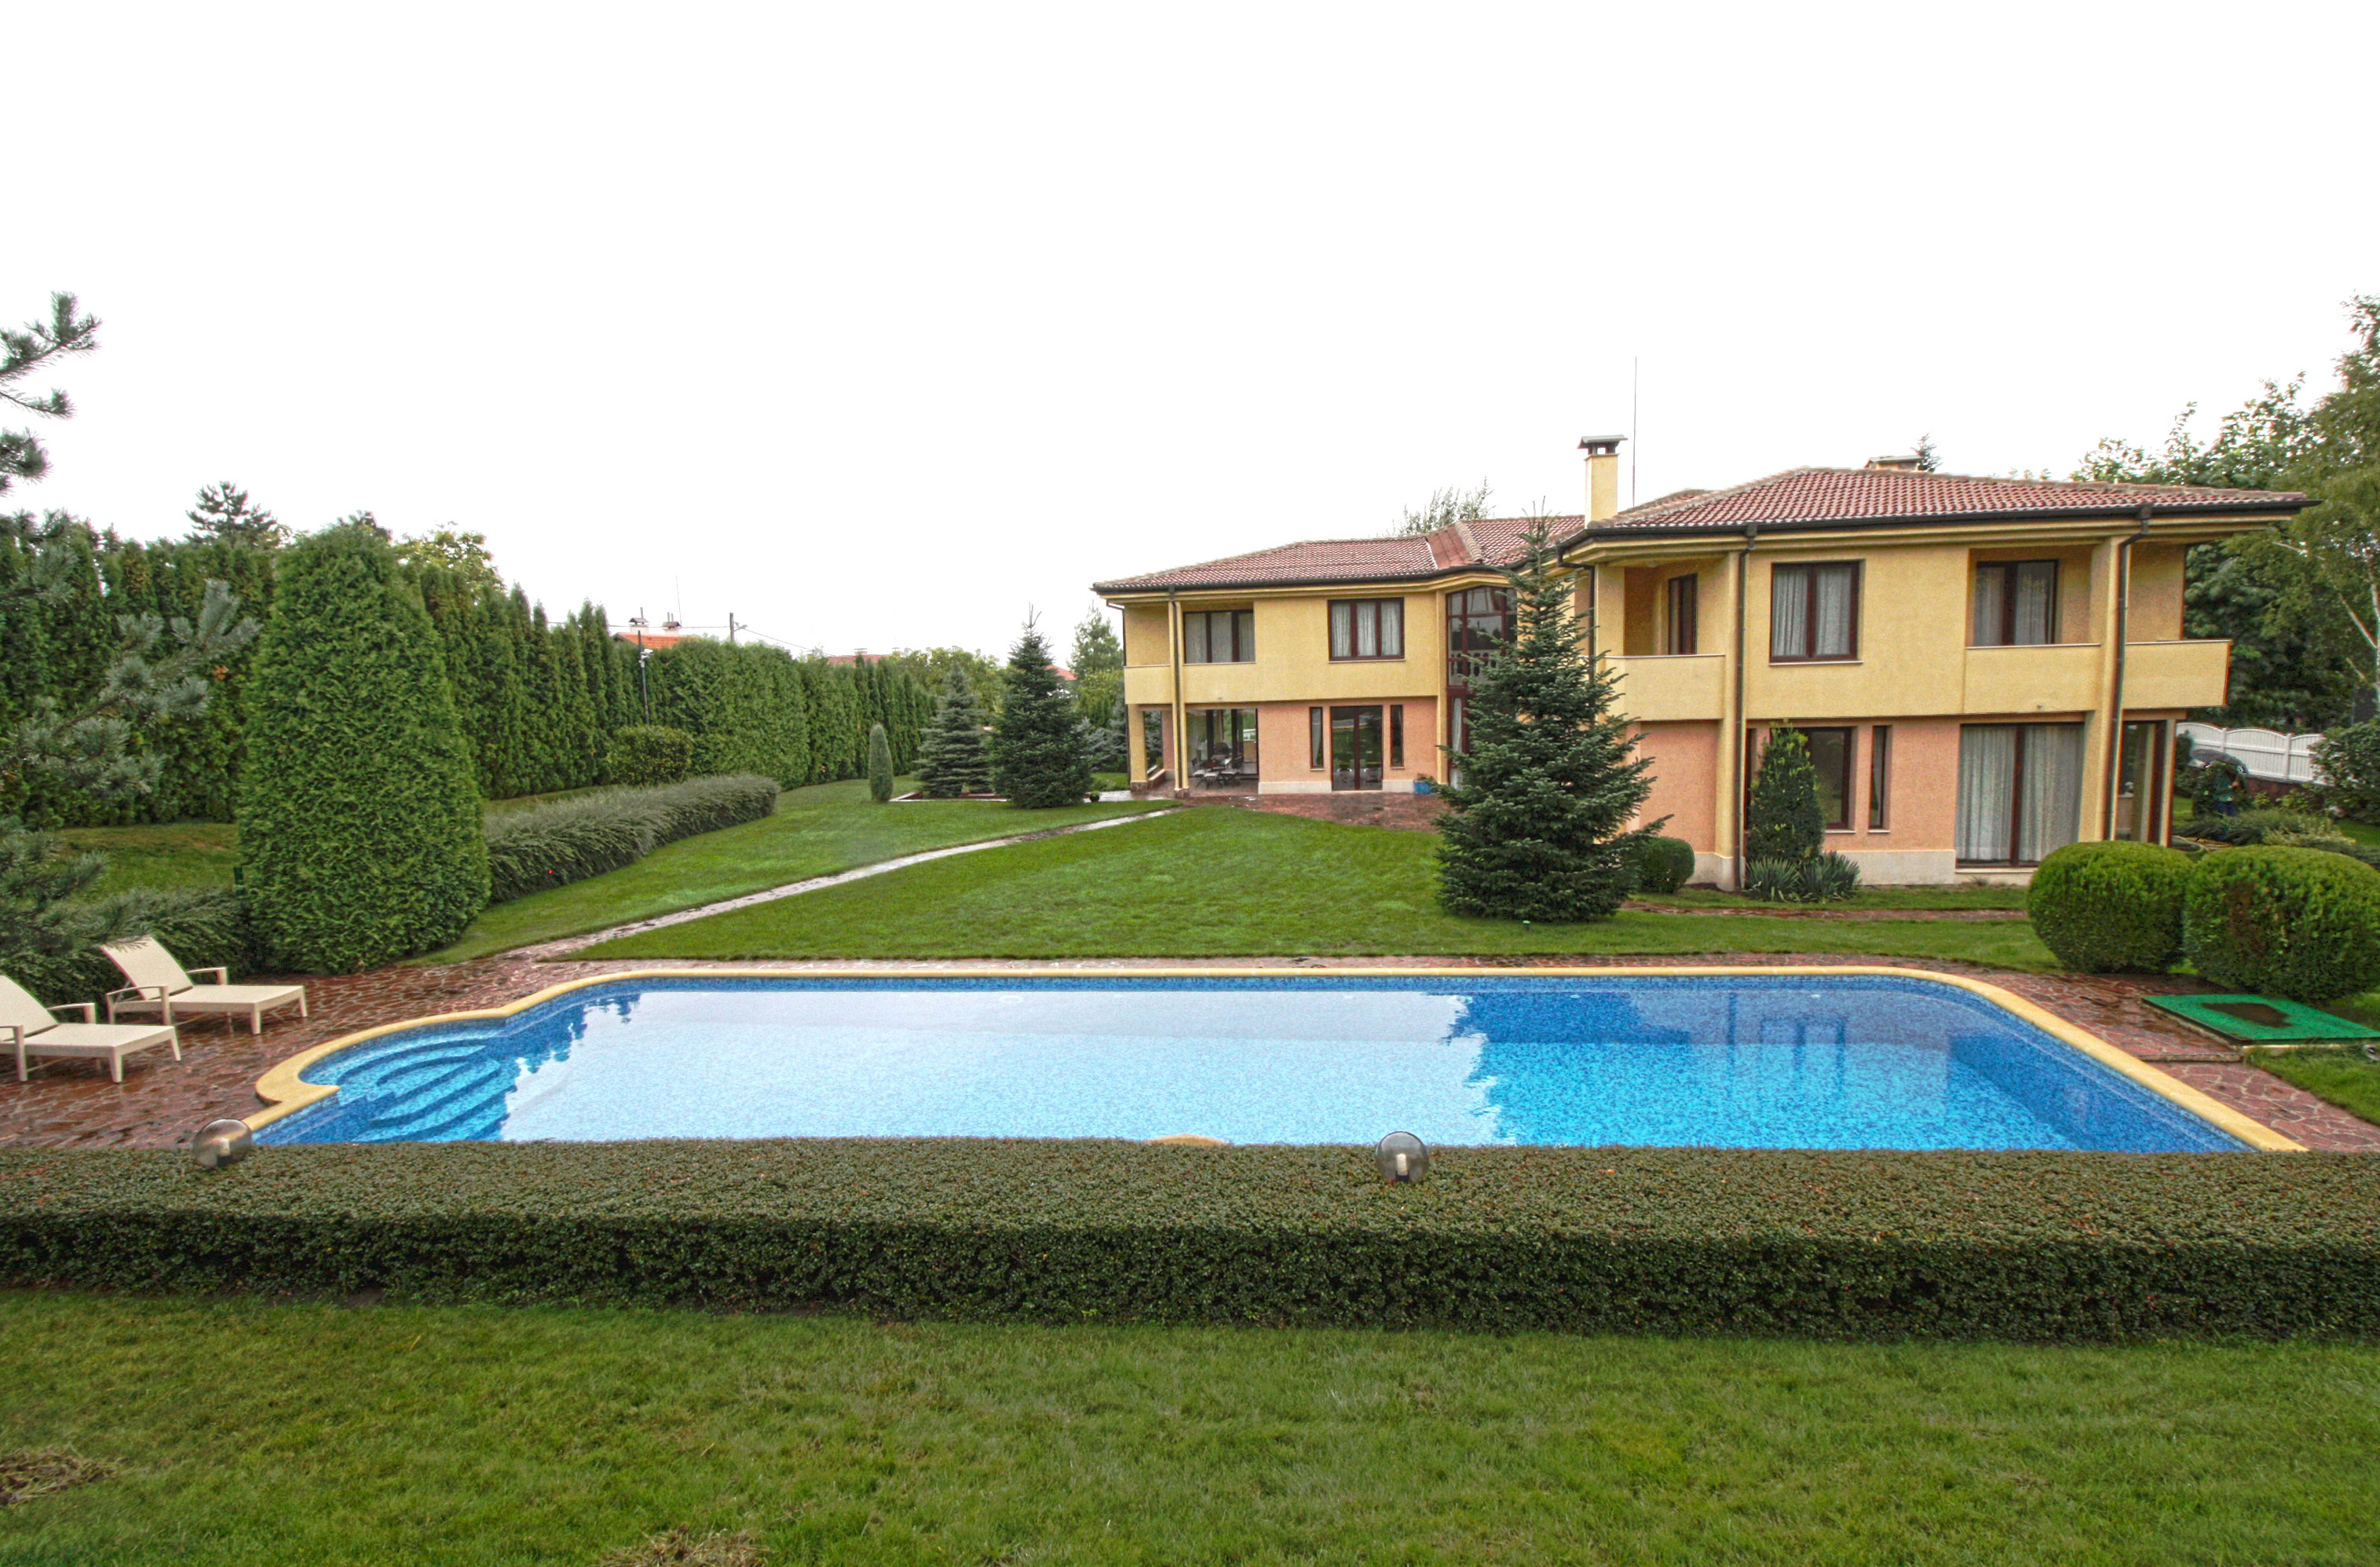 SPACIOUS SEMI-FURNISHED HOUSE IN A GATED COMMUNITY IN SIMEONOVO